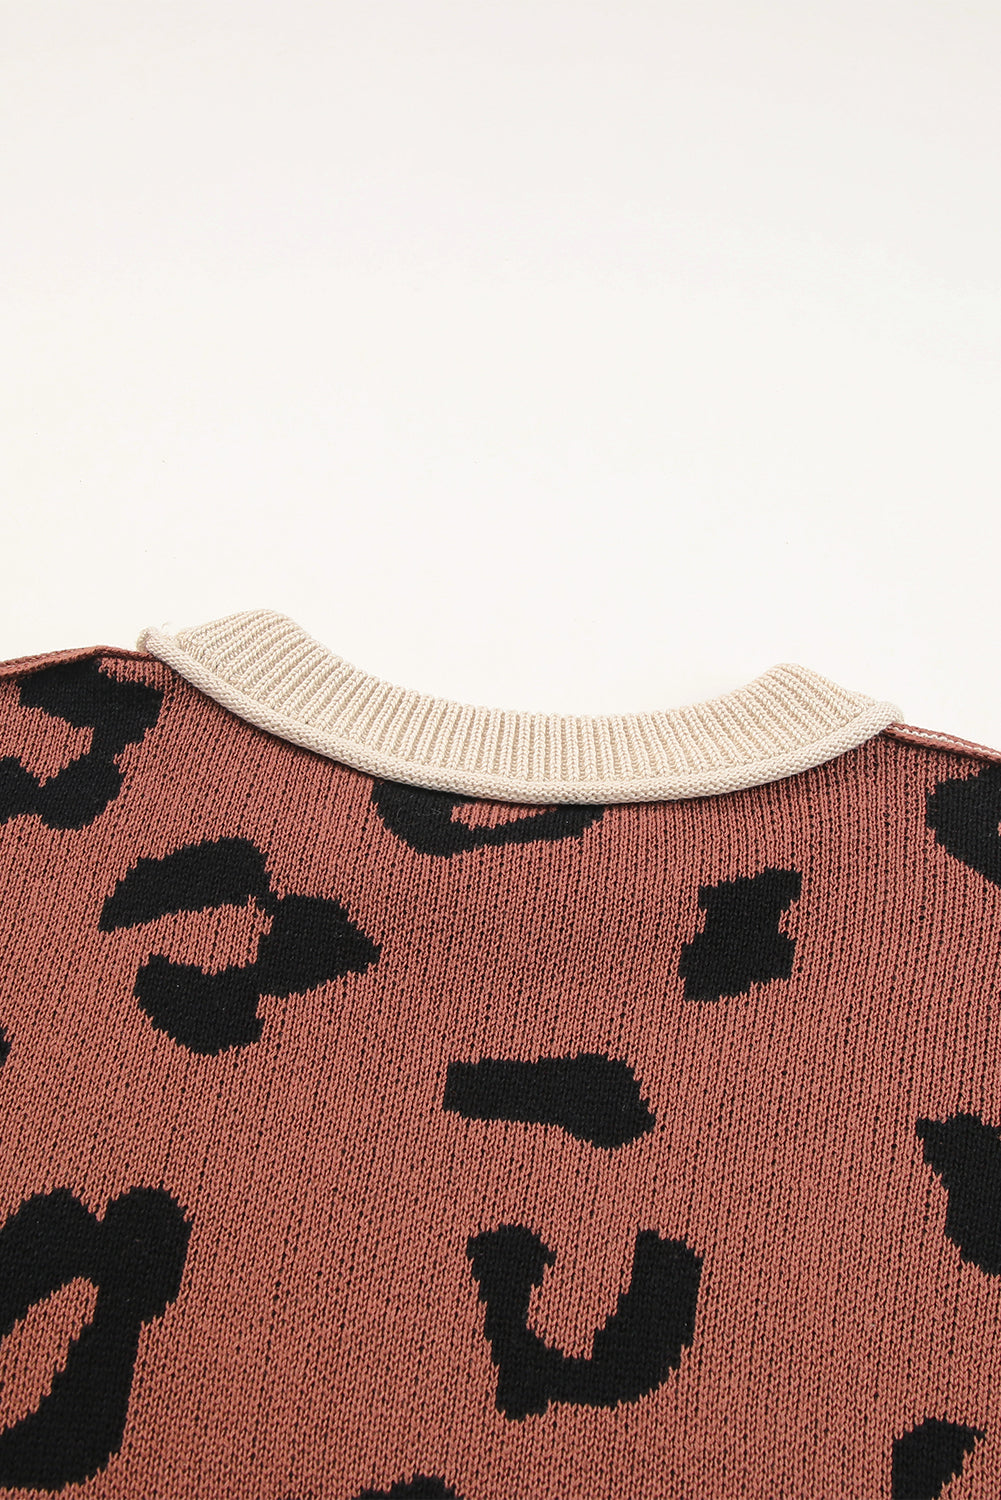 Coffee Leopard Print Patchwork Pullover Sweater